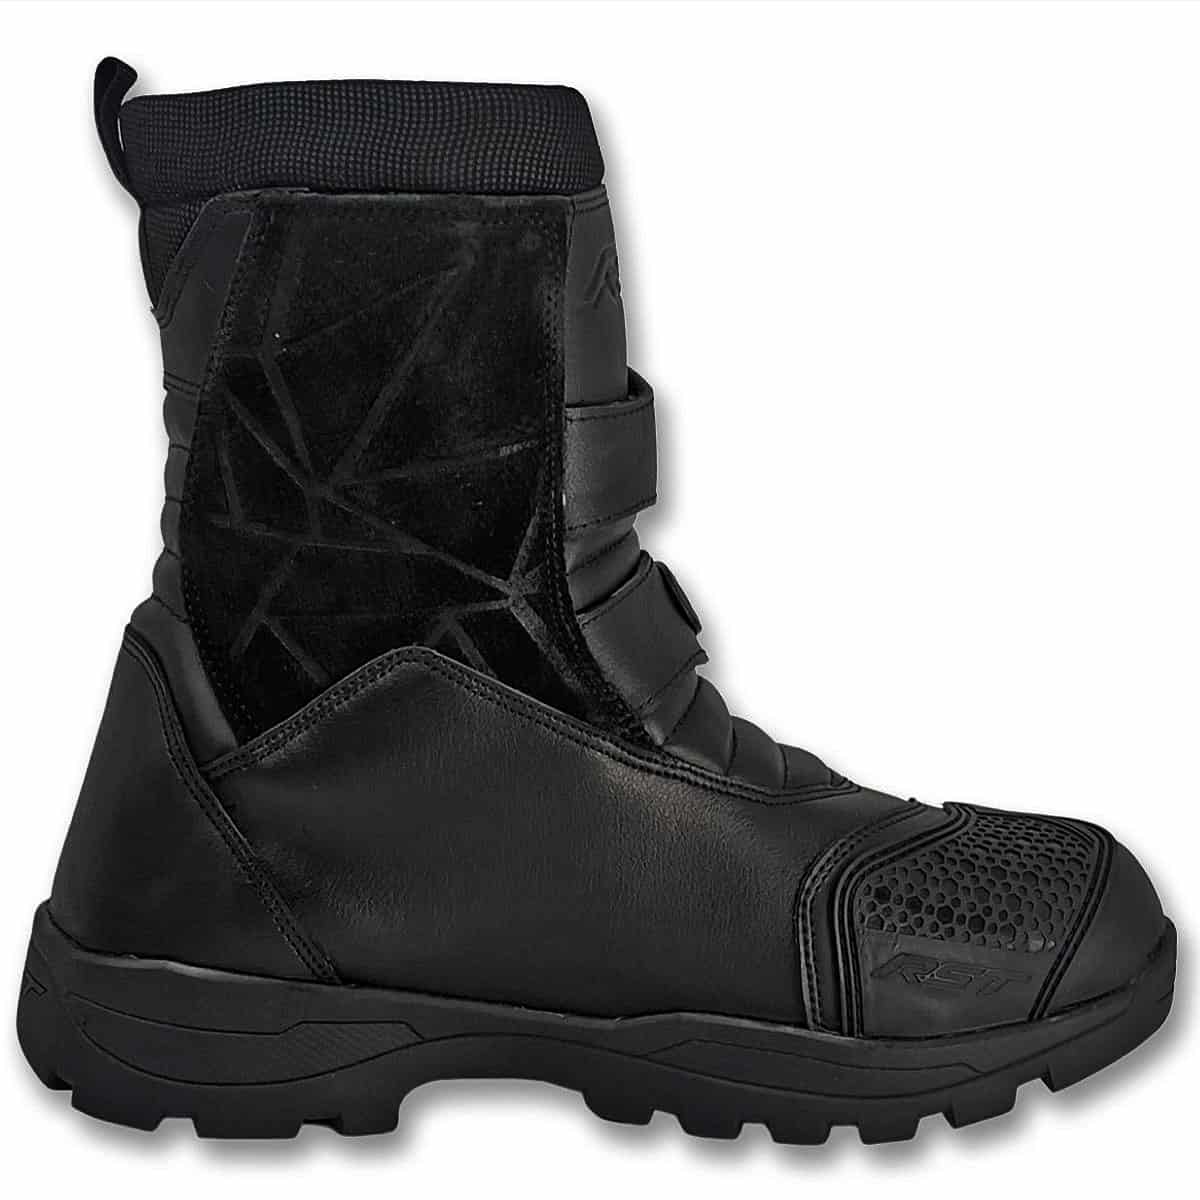 RST Adventure-X Mid Boots: A shorter version of RST's best-selling adventure touring boots - inside